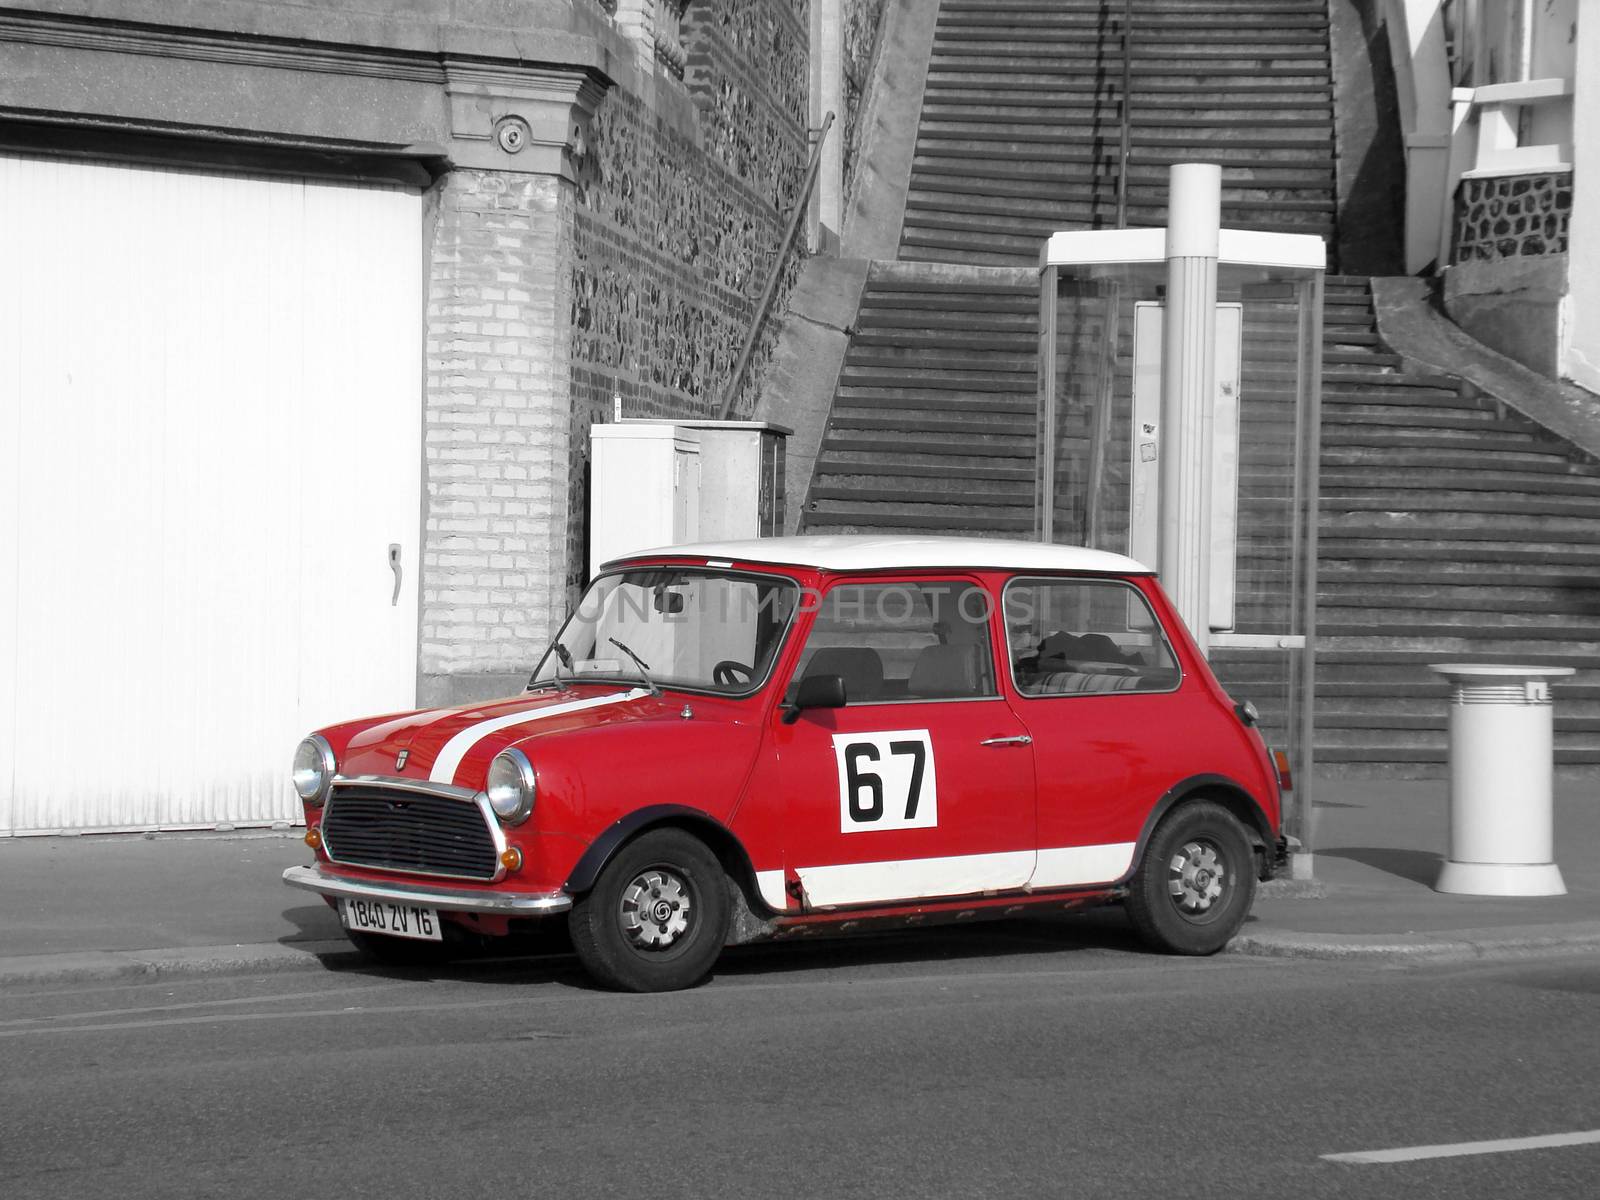 Red Austin Mini Cooper - Black and White Photography by bensib